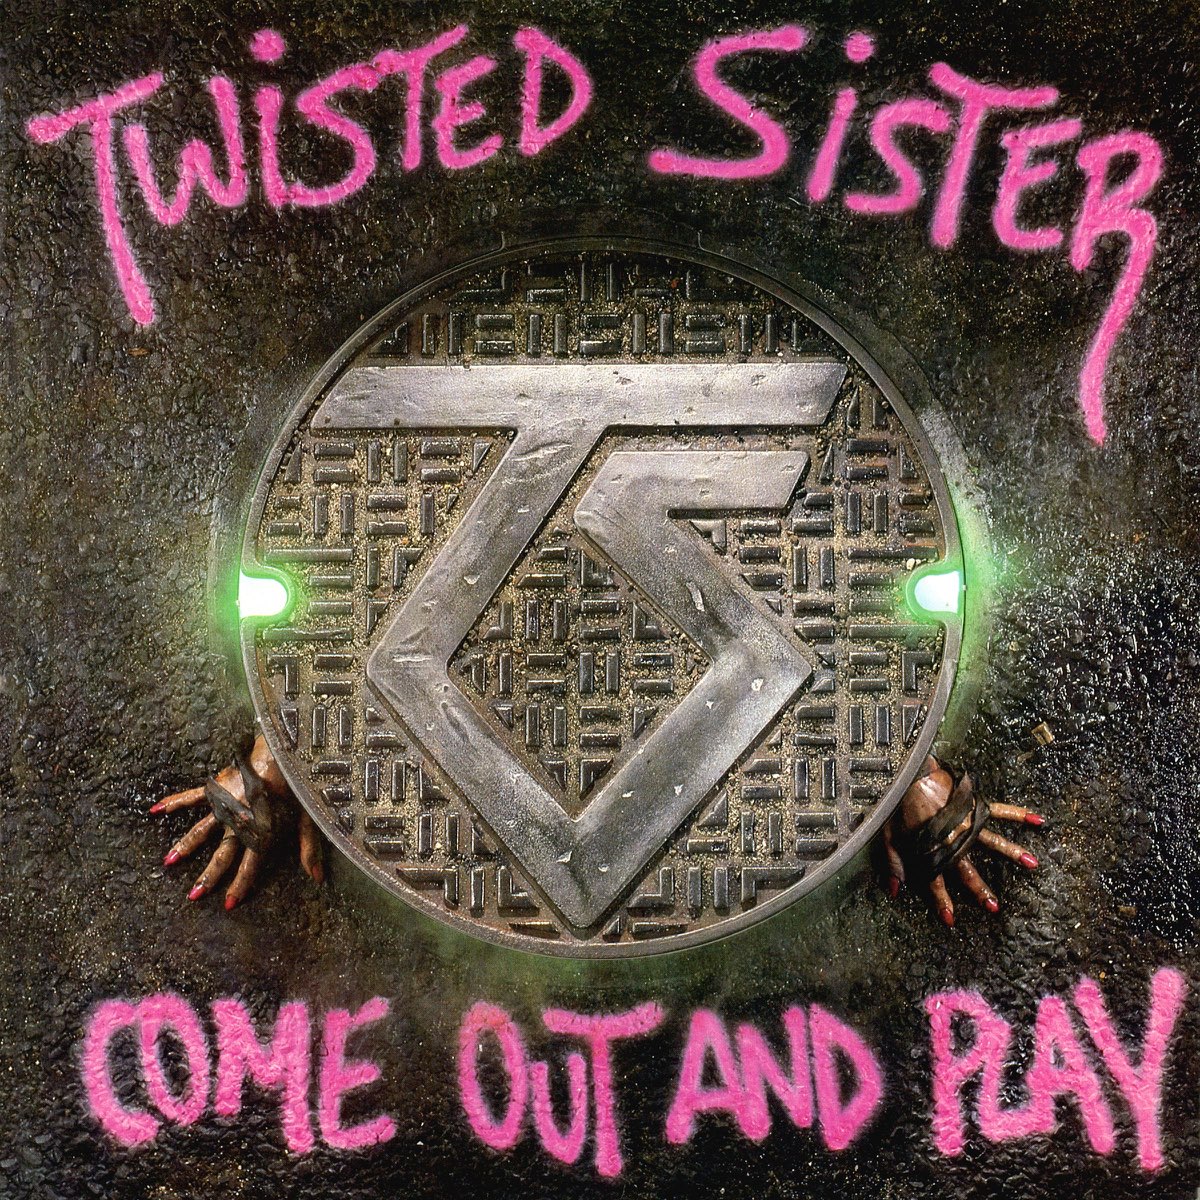 Come Out and Play by Twisted Sister on Apple Music